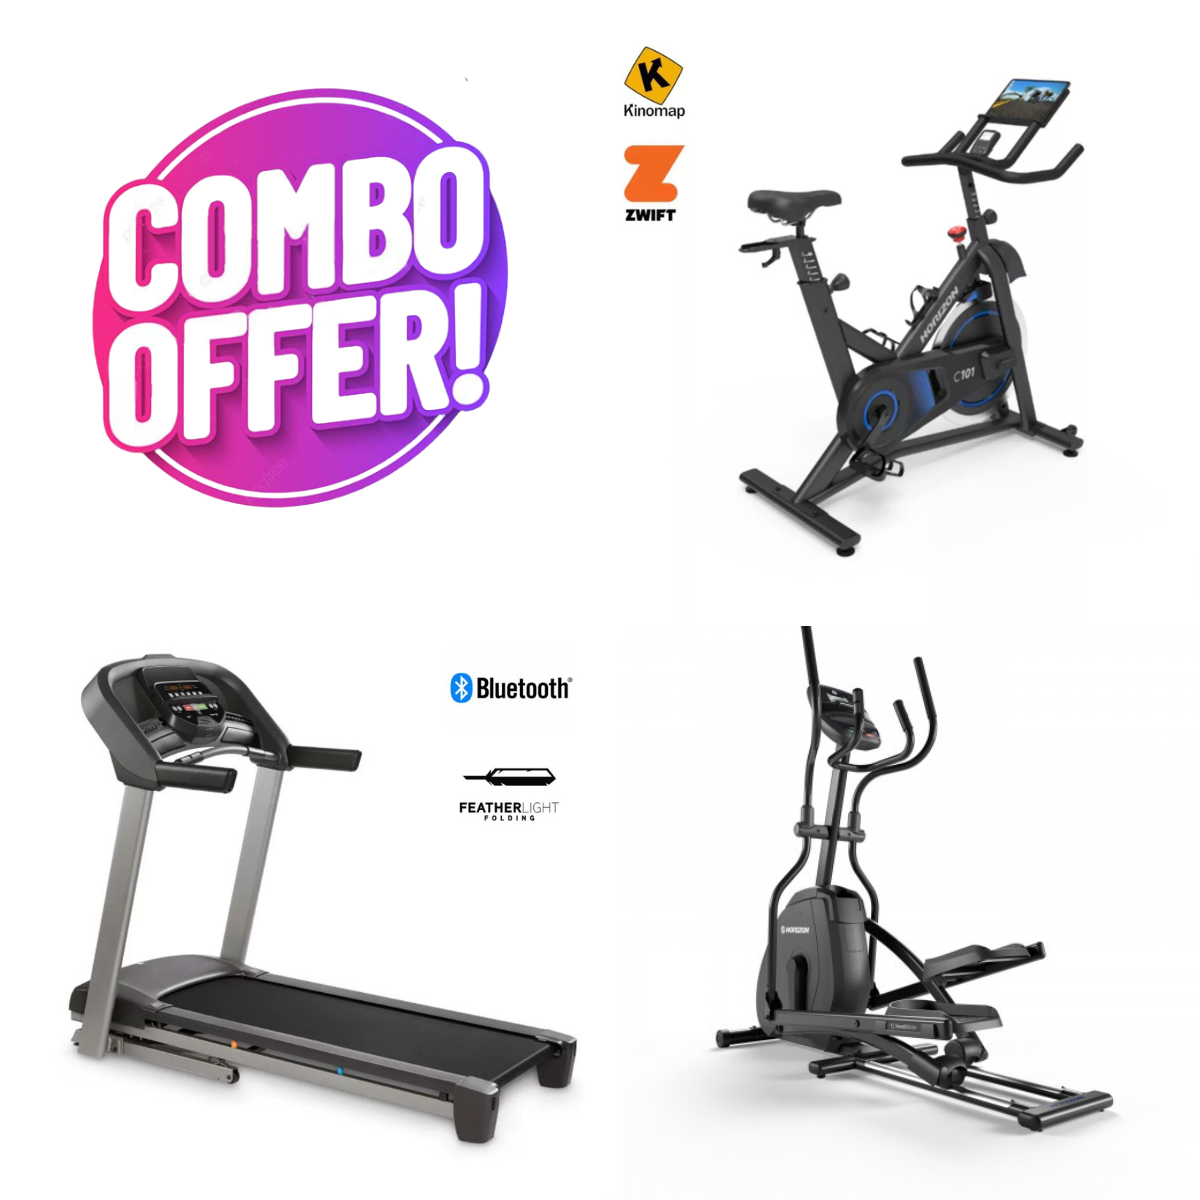 Horizon Complete Home Cardio Combo – 3-Year Warranty and Service Plan